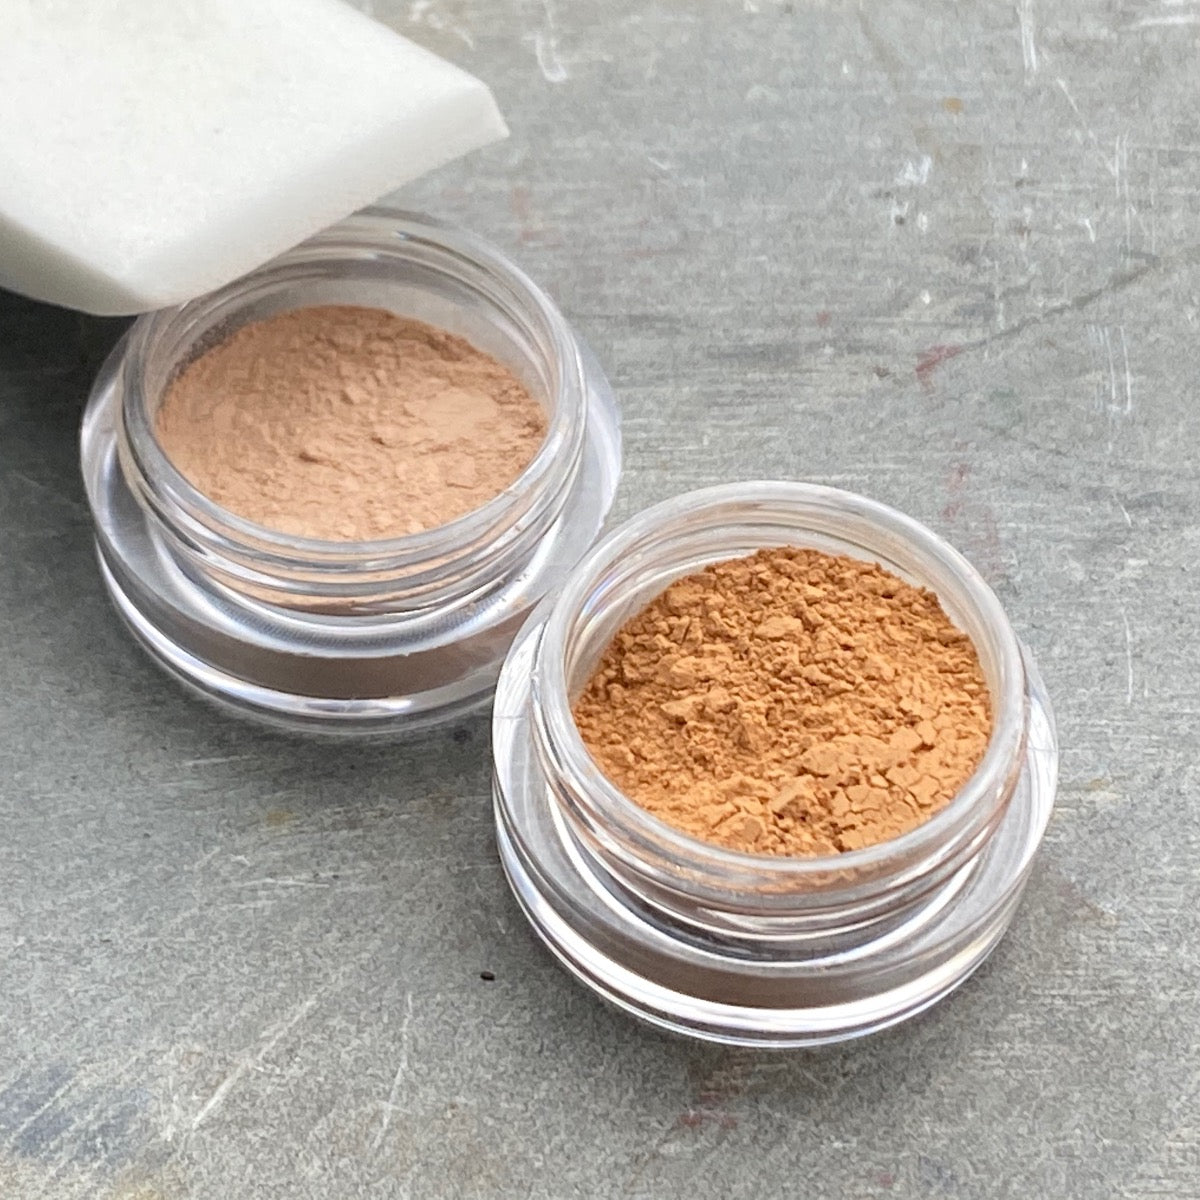 Lightweight coverage mini powder and concealer combination mini sizes